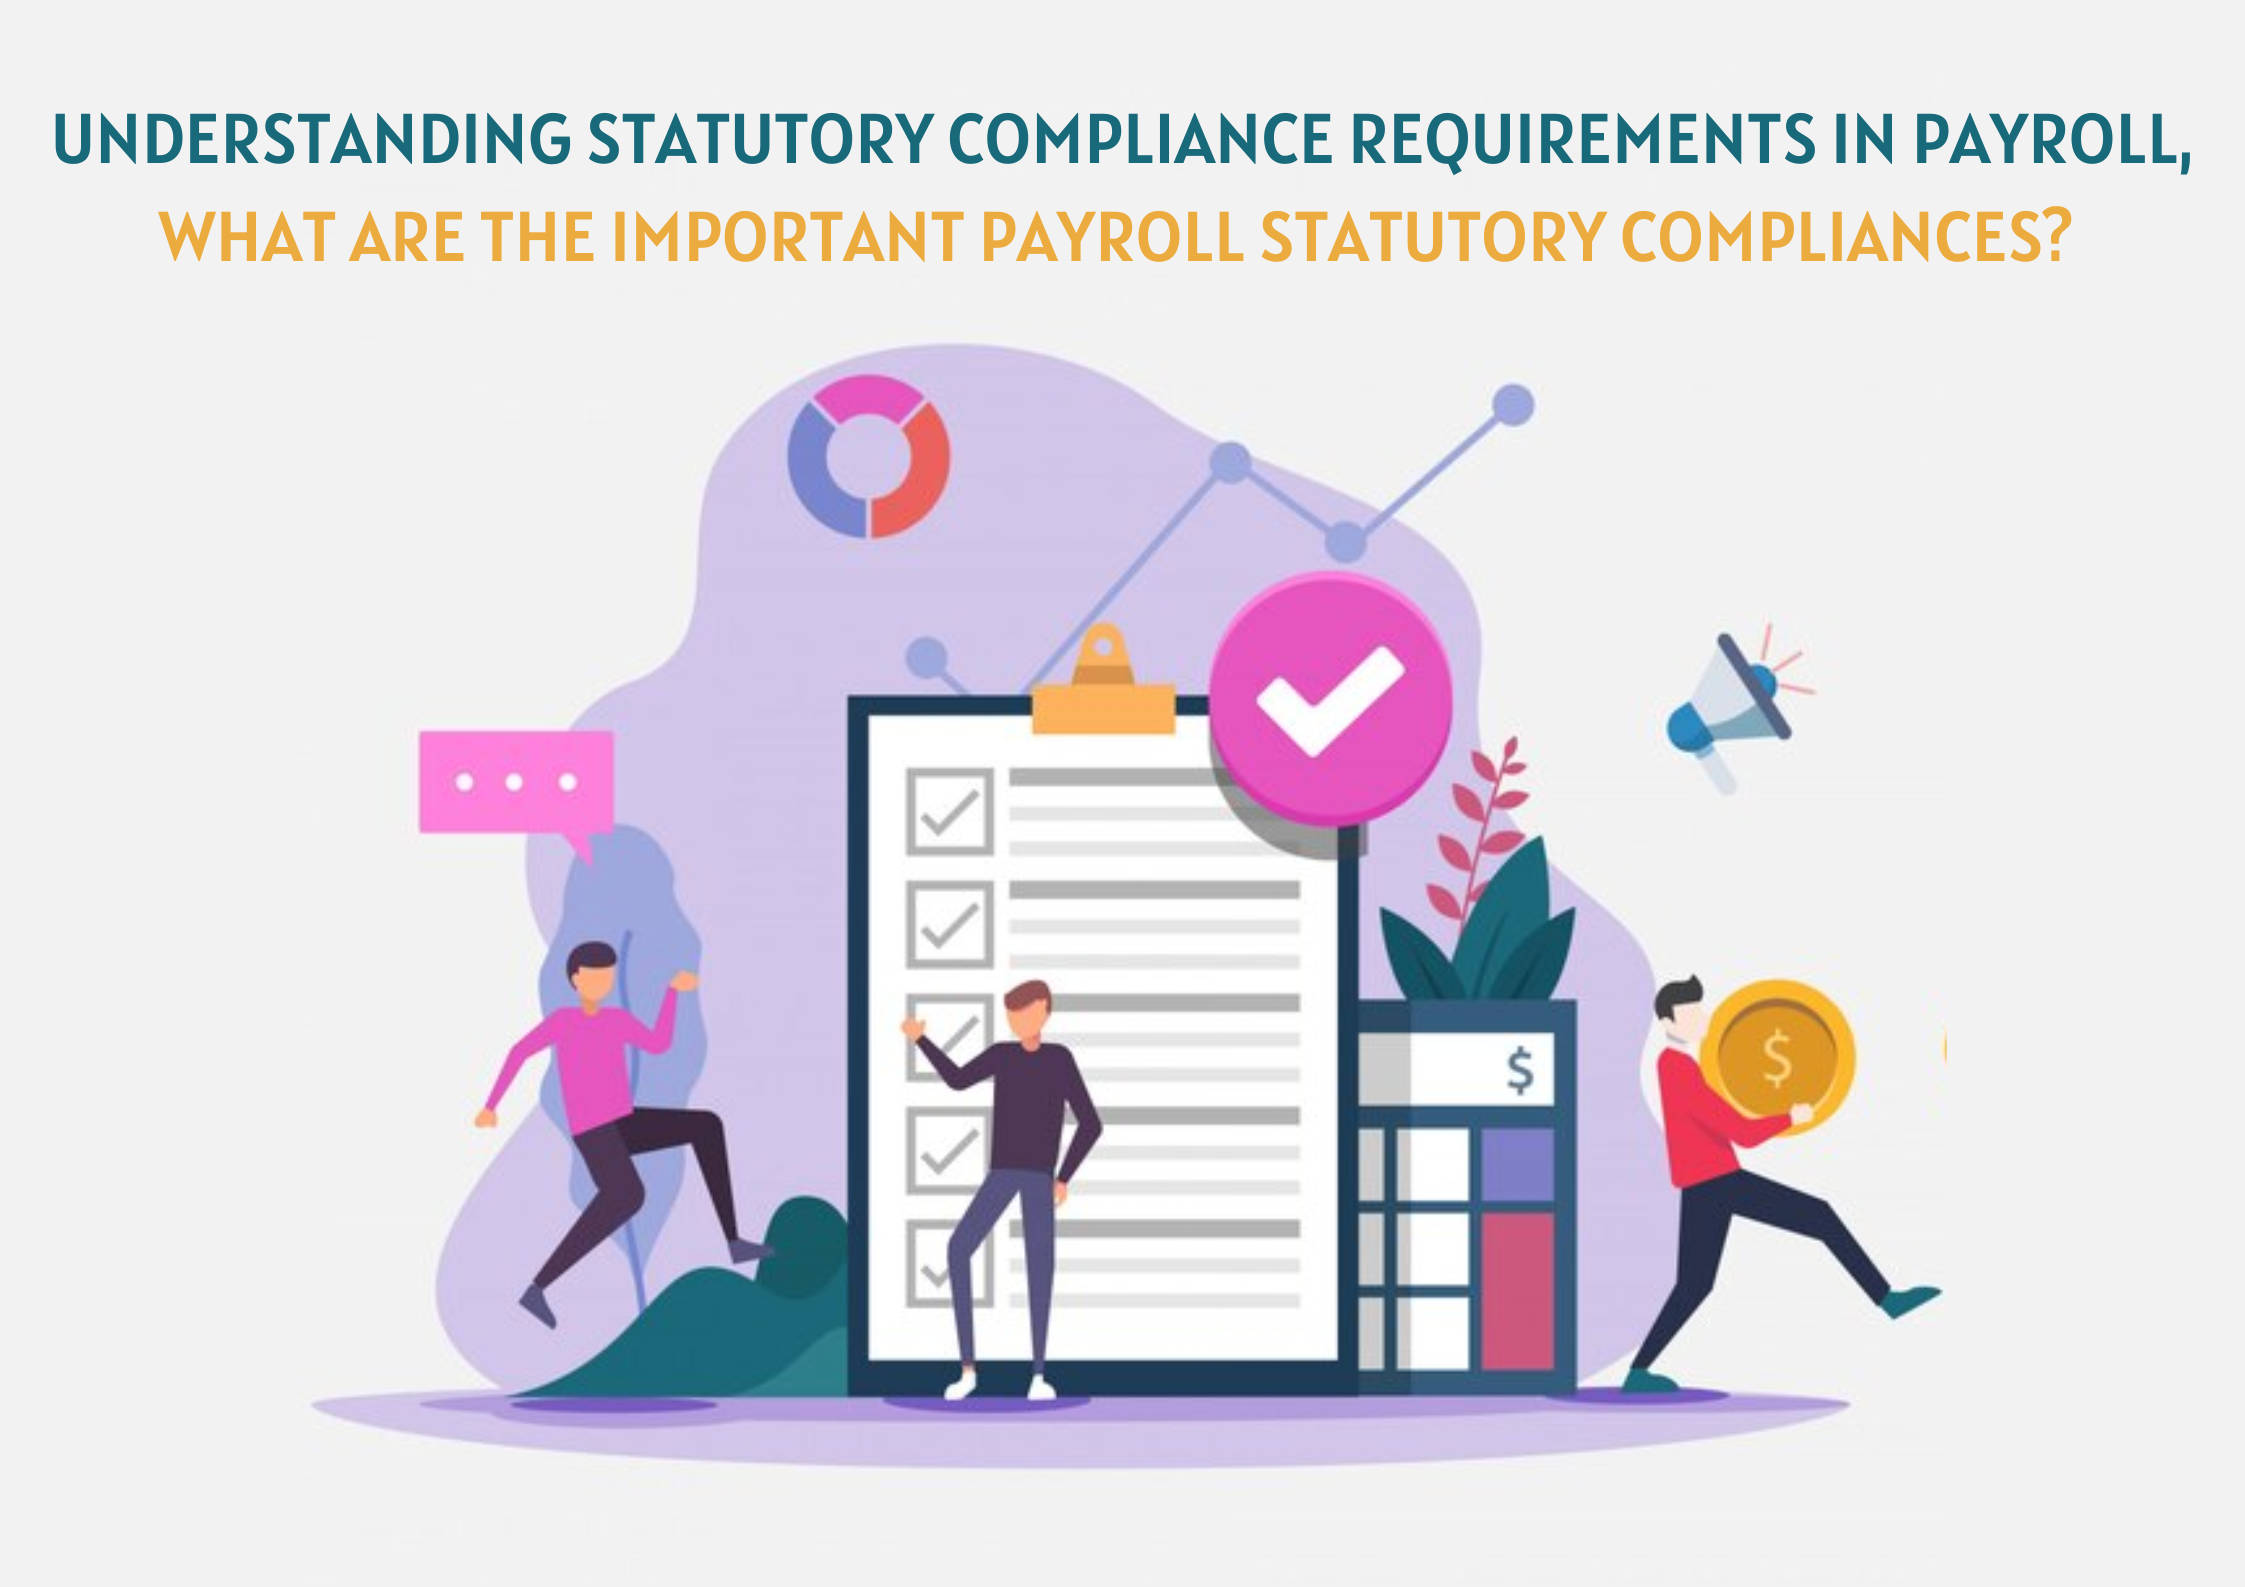 Understanding Statutory Compliance Requirements in Payroll what are the important payroll statutory compliances